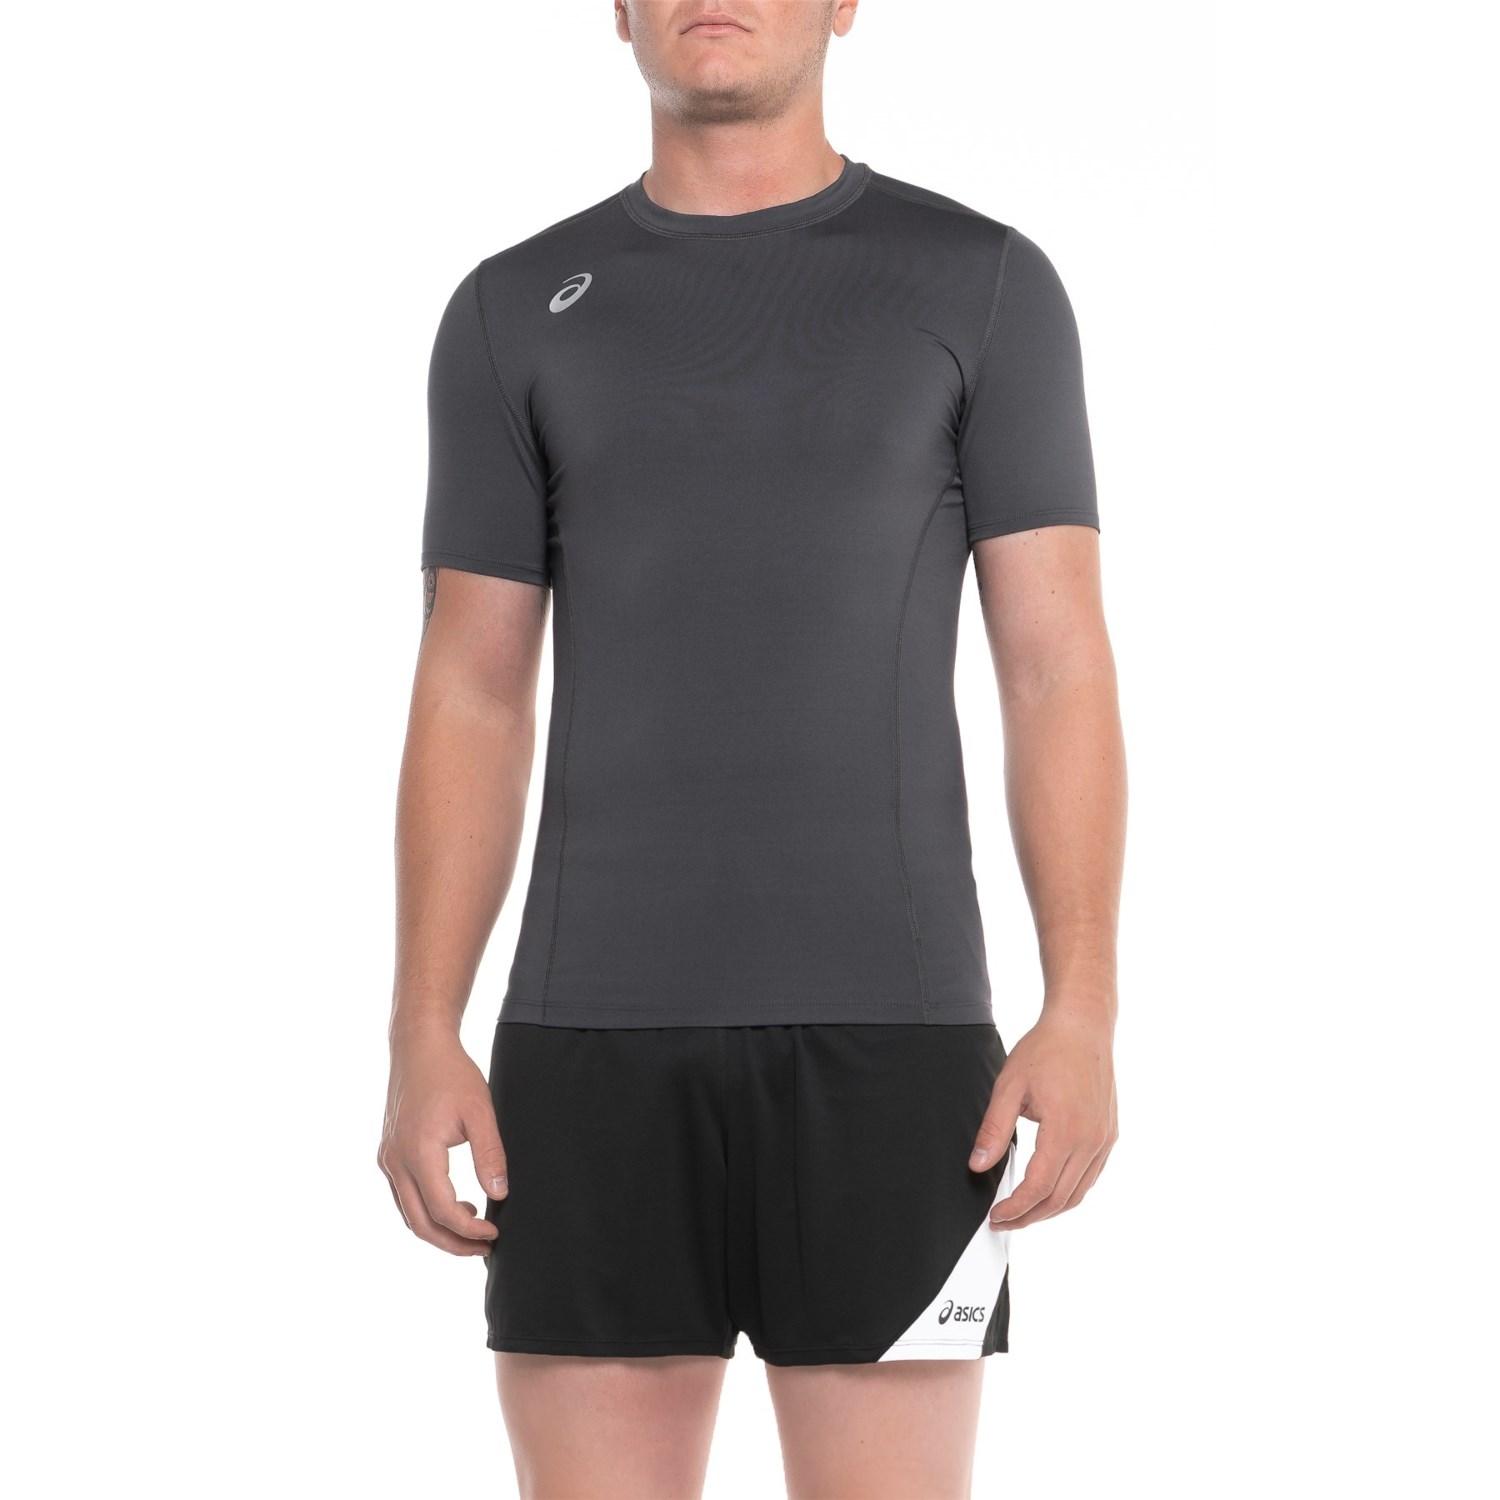 Asics Synthetic Compression Running T-shirt in Steel Grey (Gray) for Men -  Lyst